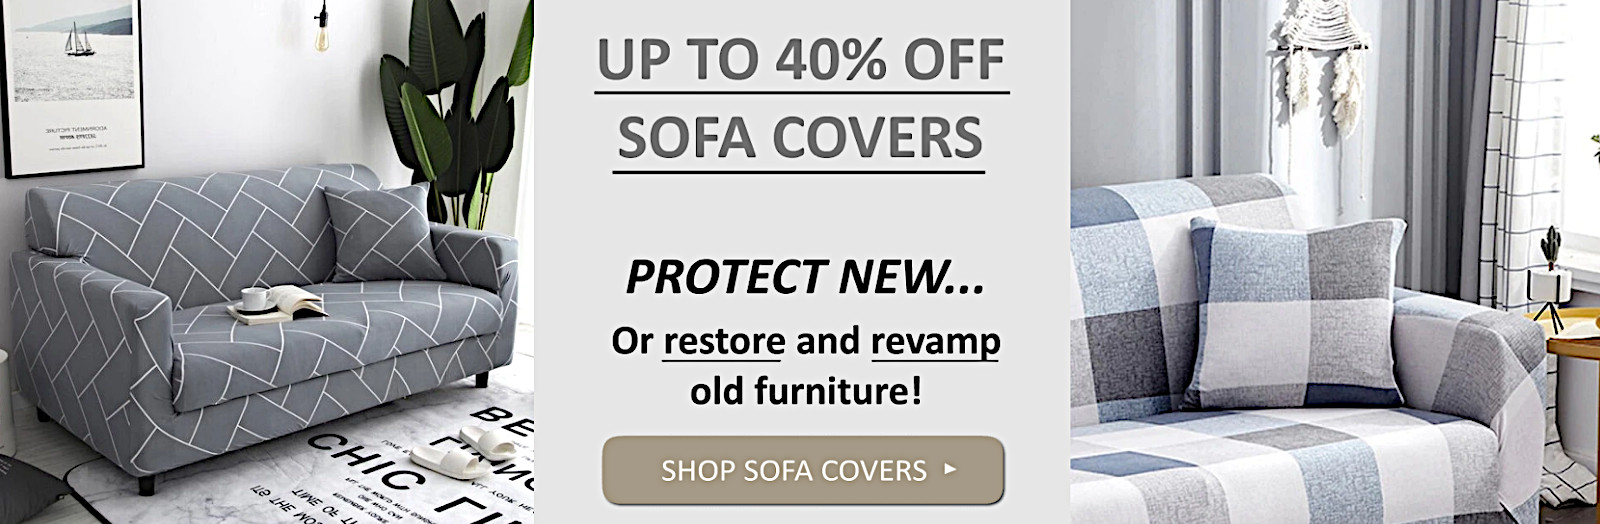 Clearance Price sofa covers